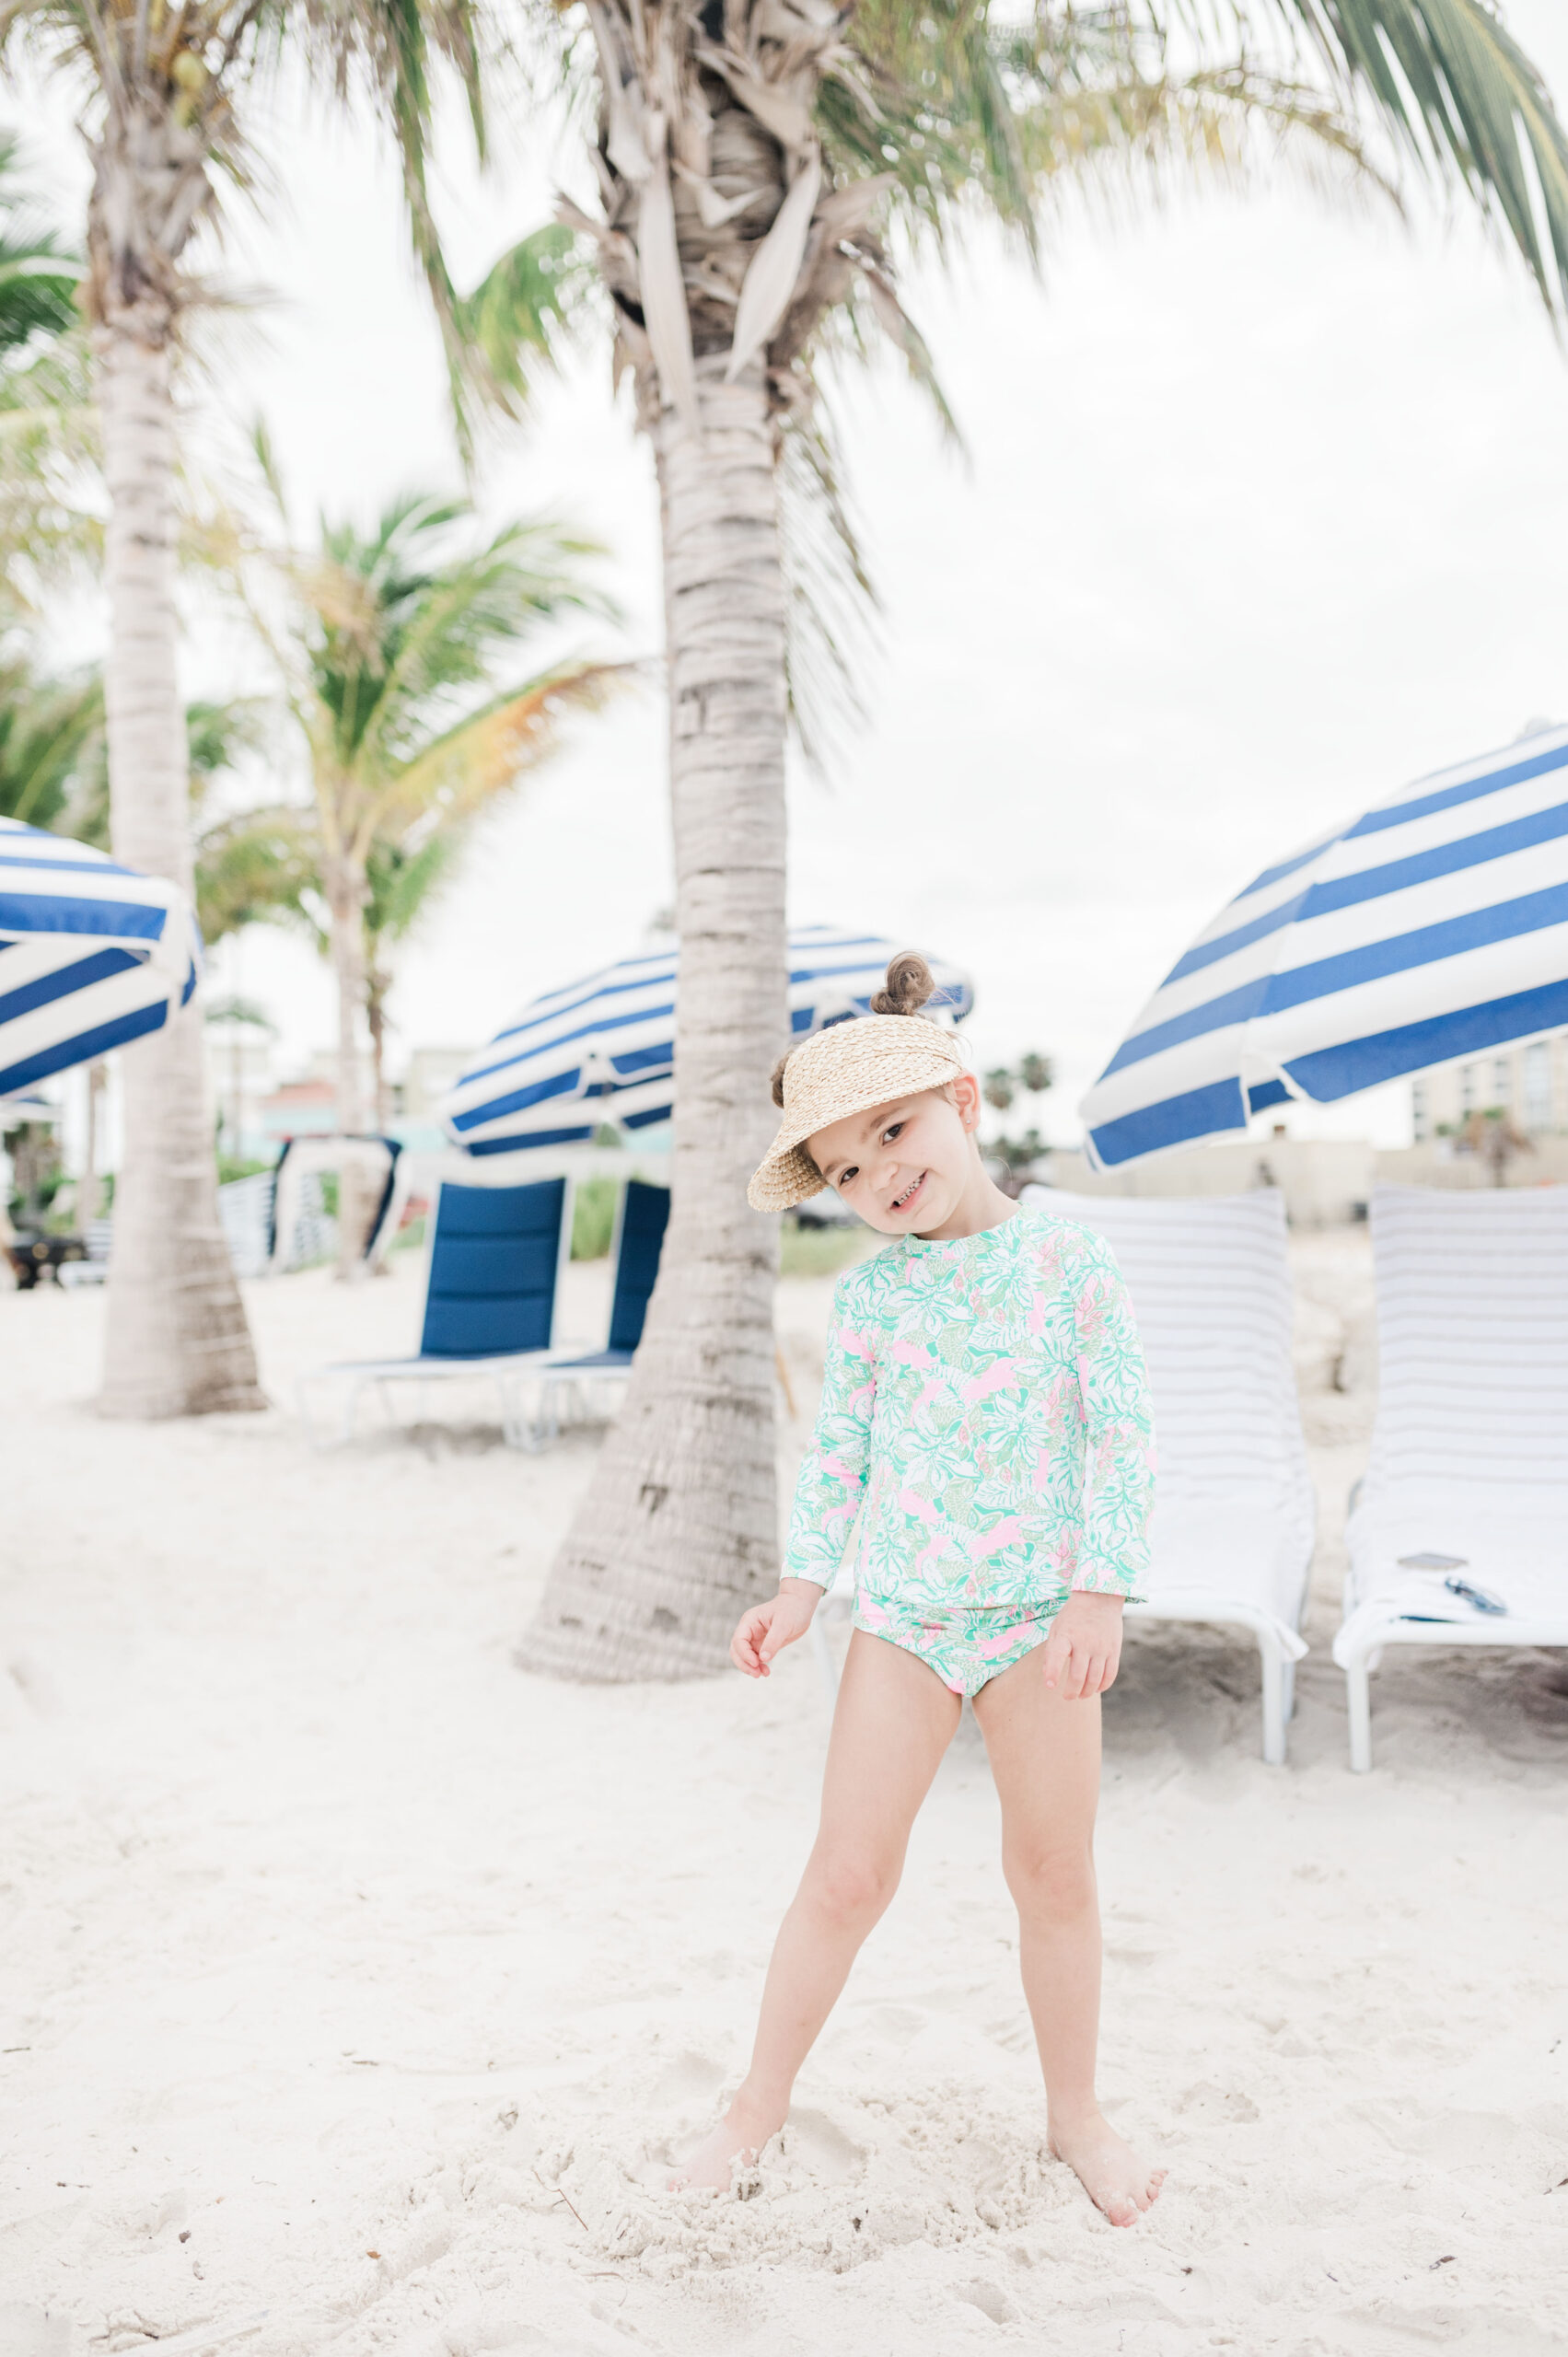 Eleanor in Lilly Pulitzer rashguard swimsuit standing on the beach at JW Marriott Clearwater Beach with white and blue striped umbrellas behind her